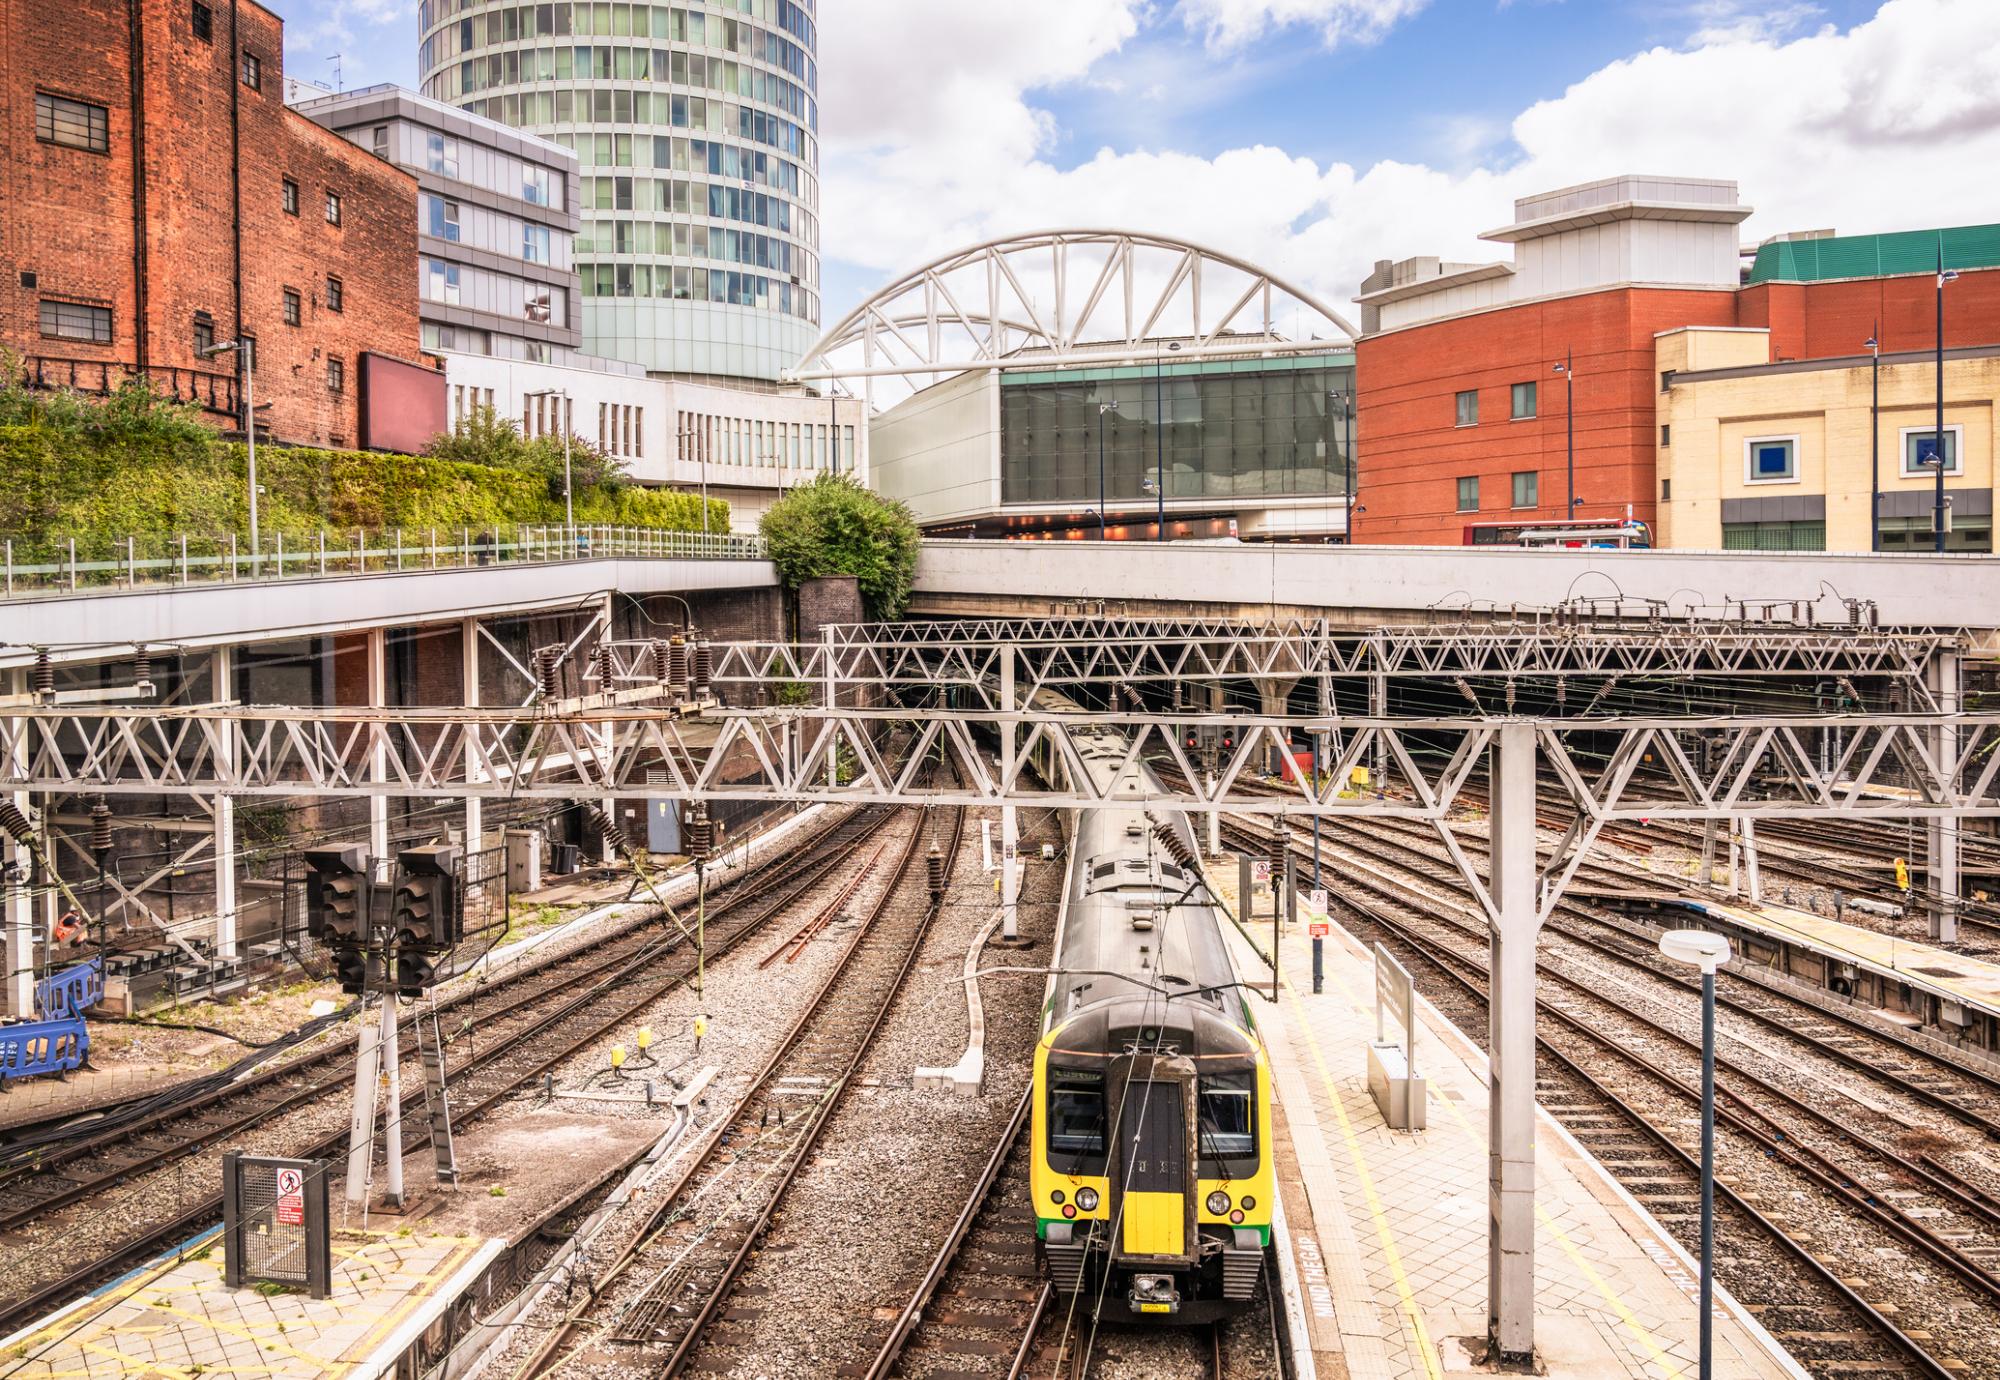 Supporting major transport in the Midlands